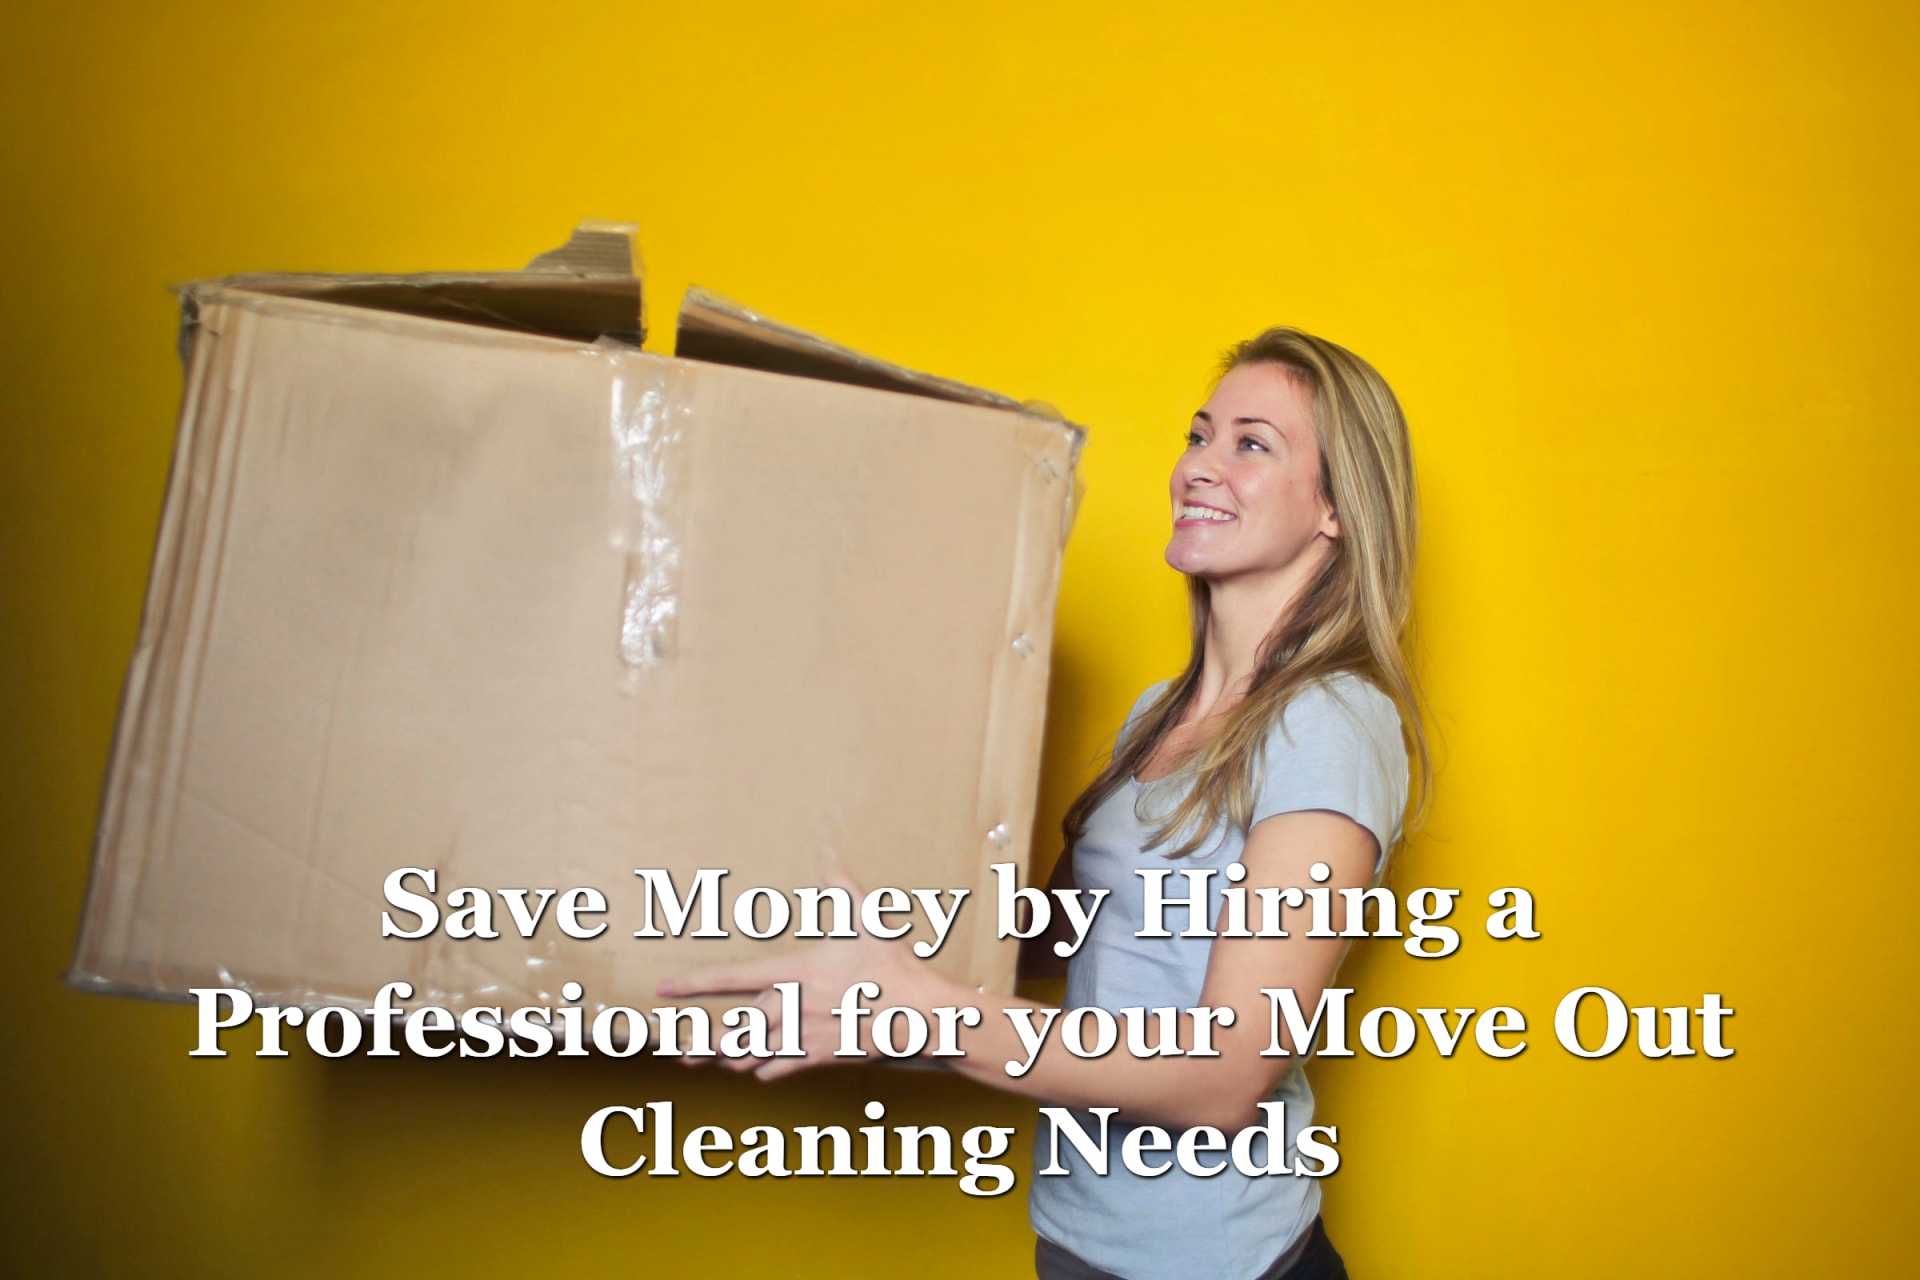 A Professional Move Out Cleaning Can Save You Money